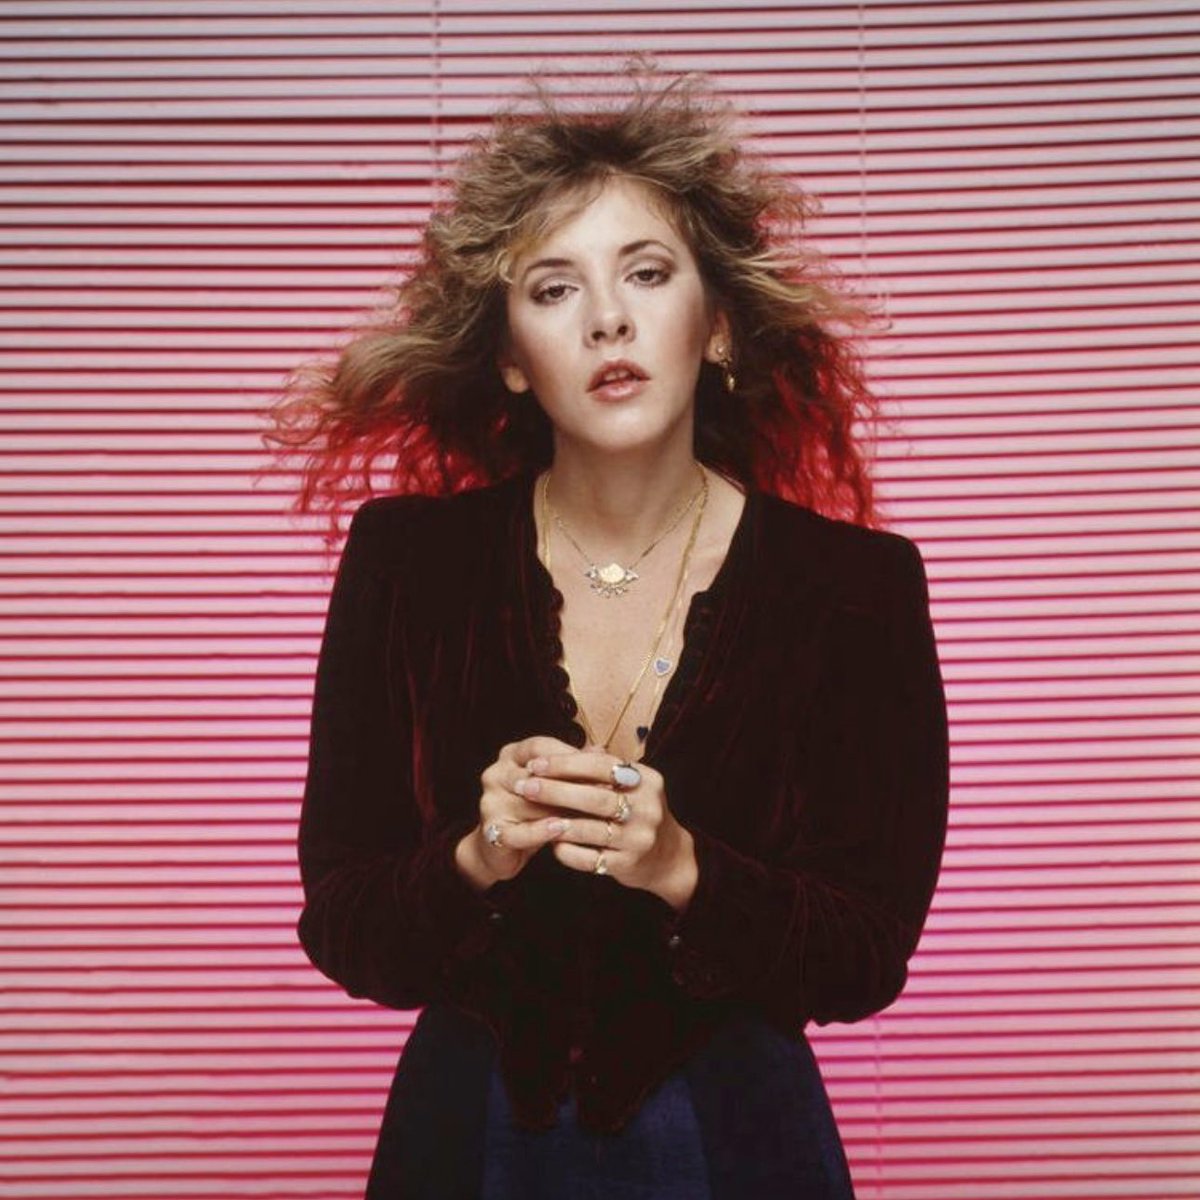 RT @StevieInPhotos: Stevie Nicks, Photographed by Sam Emerson, 1979 https://t.co/yD9hpEaida